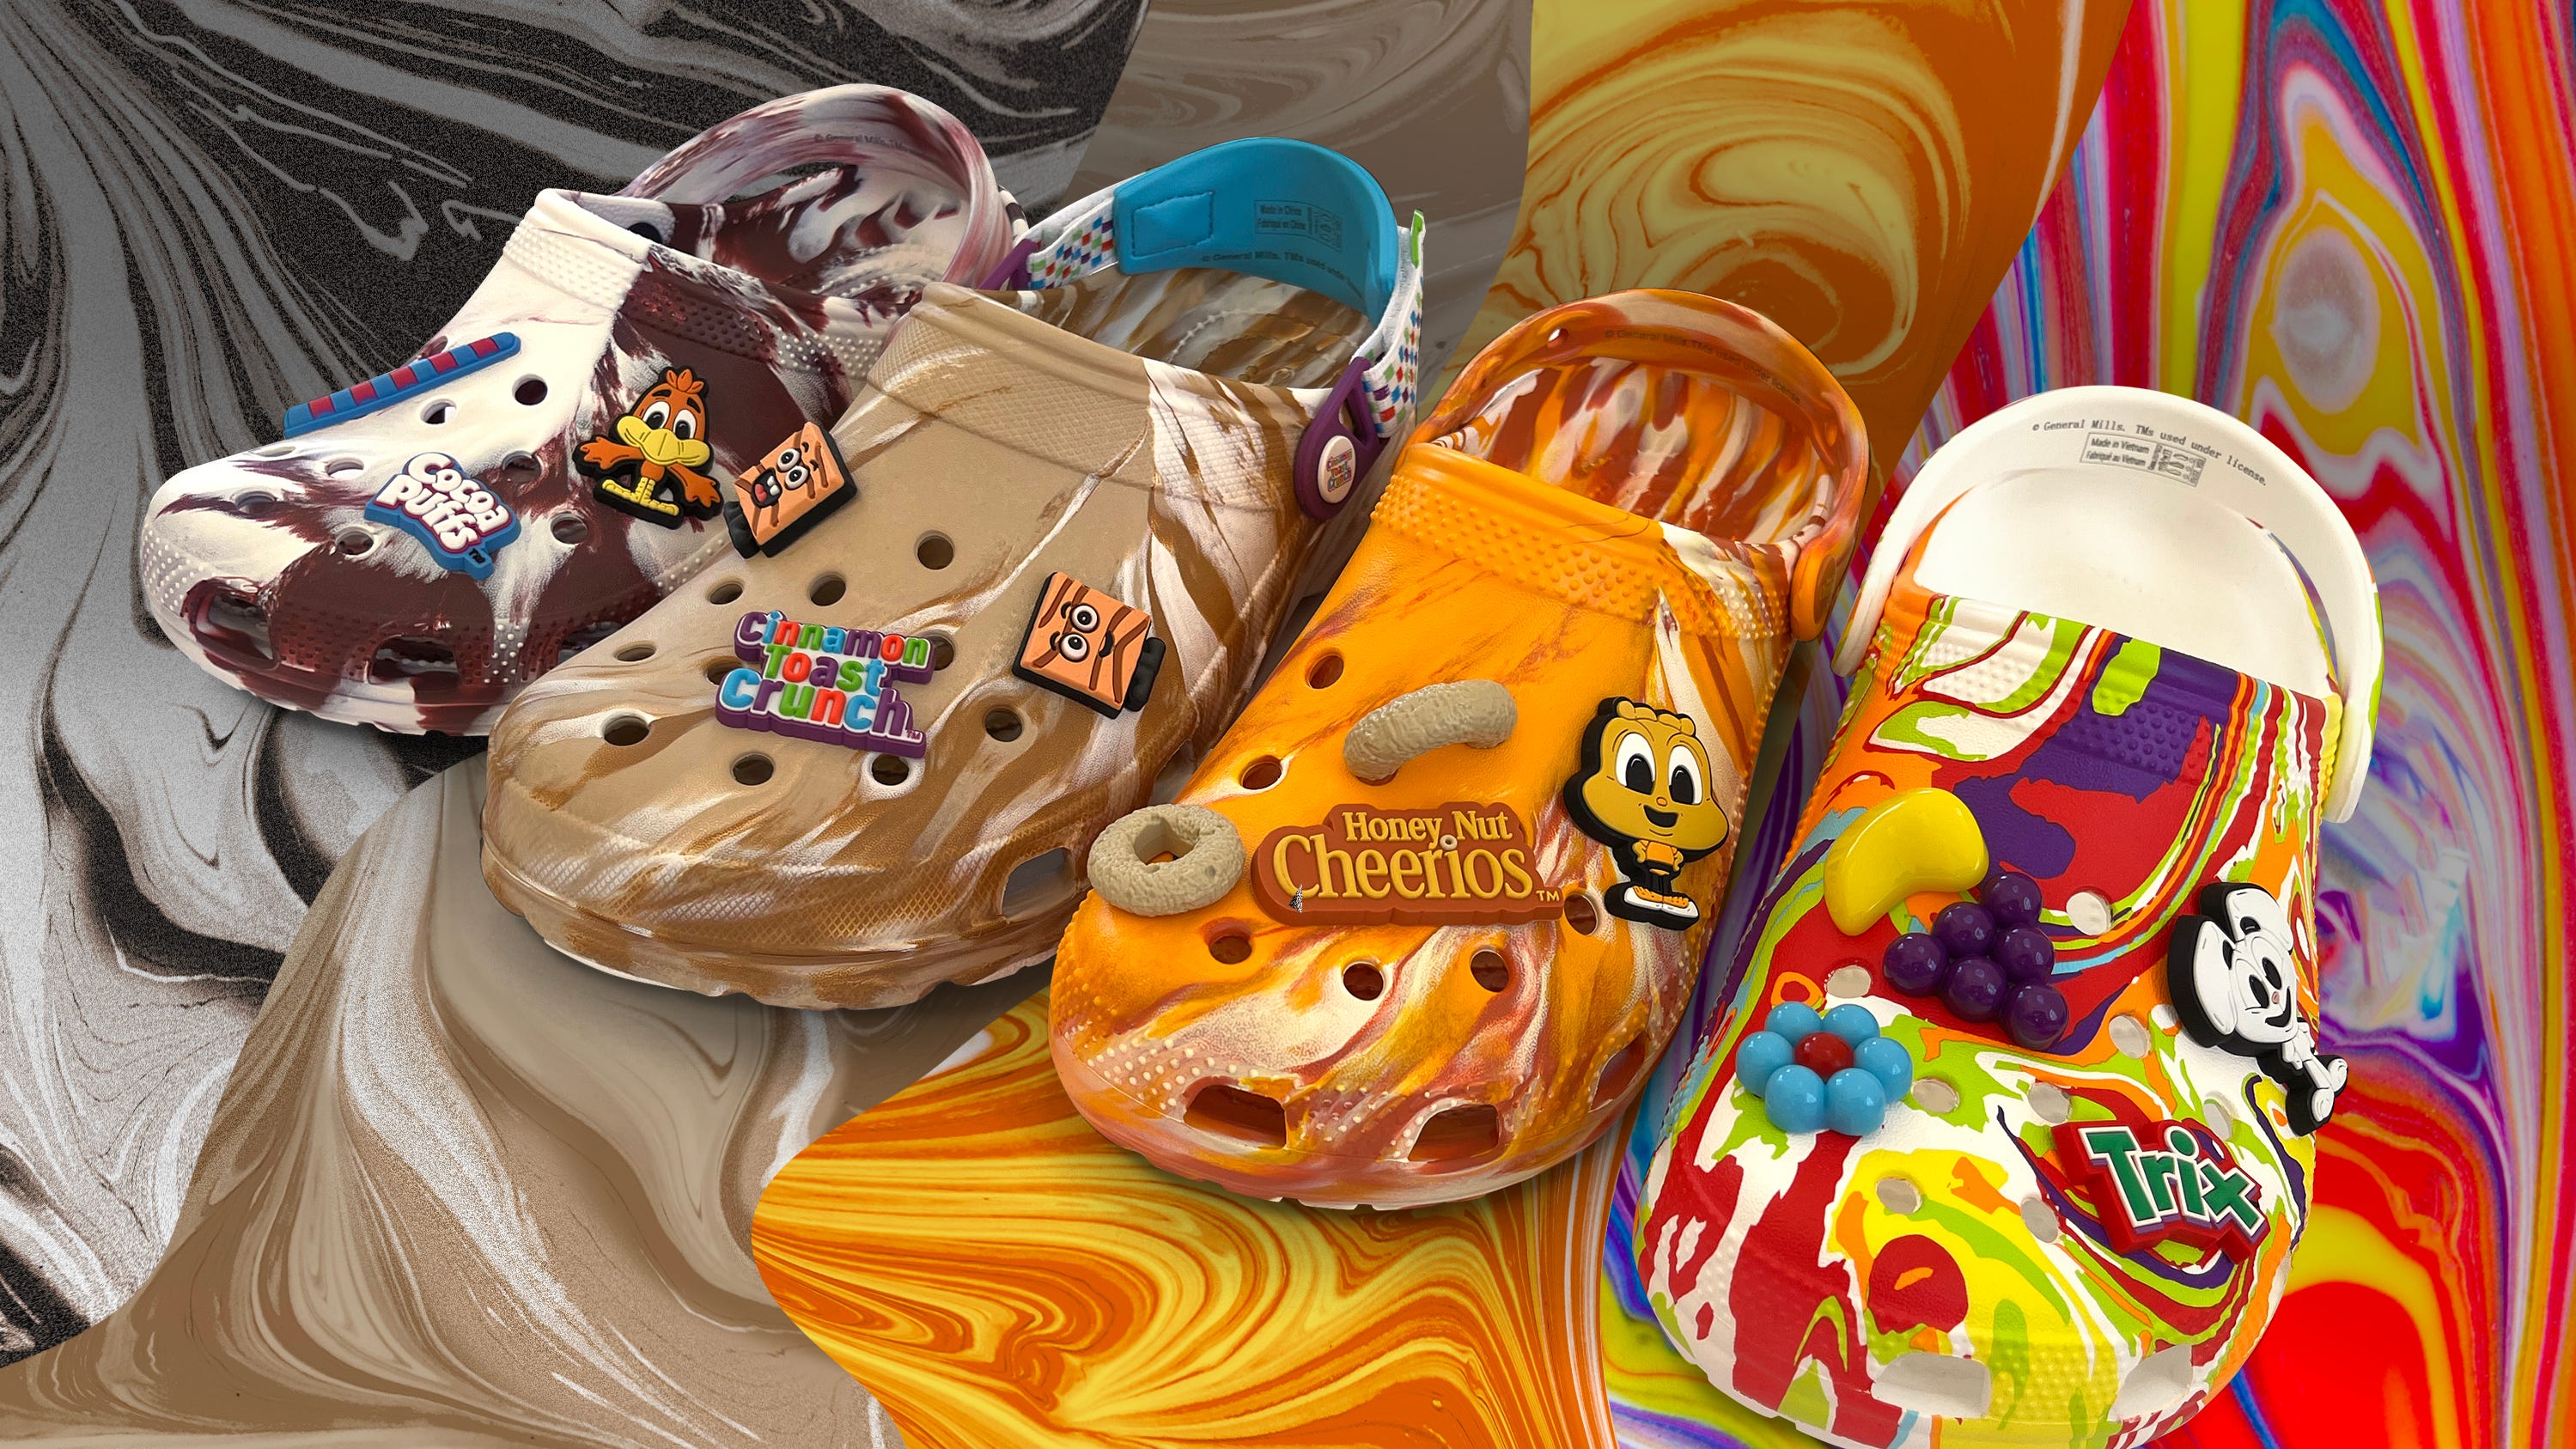 Cerealinspired Crocs have hit shelves. Here's how to get some.